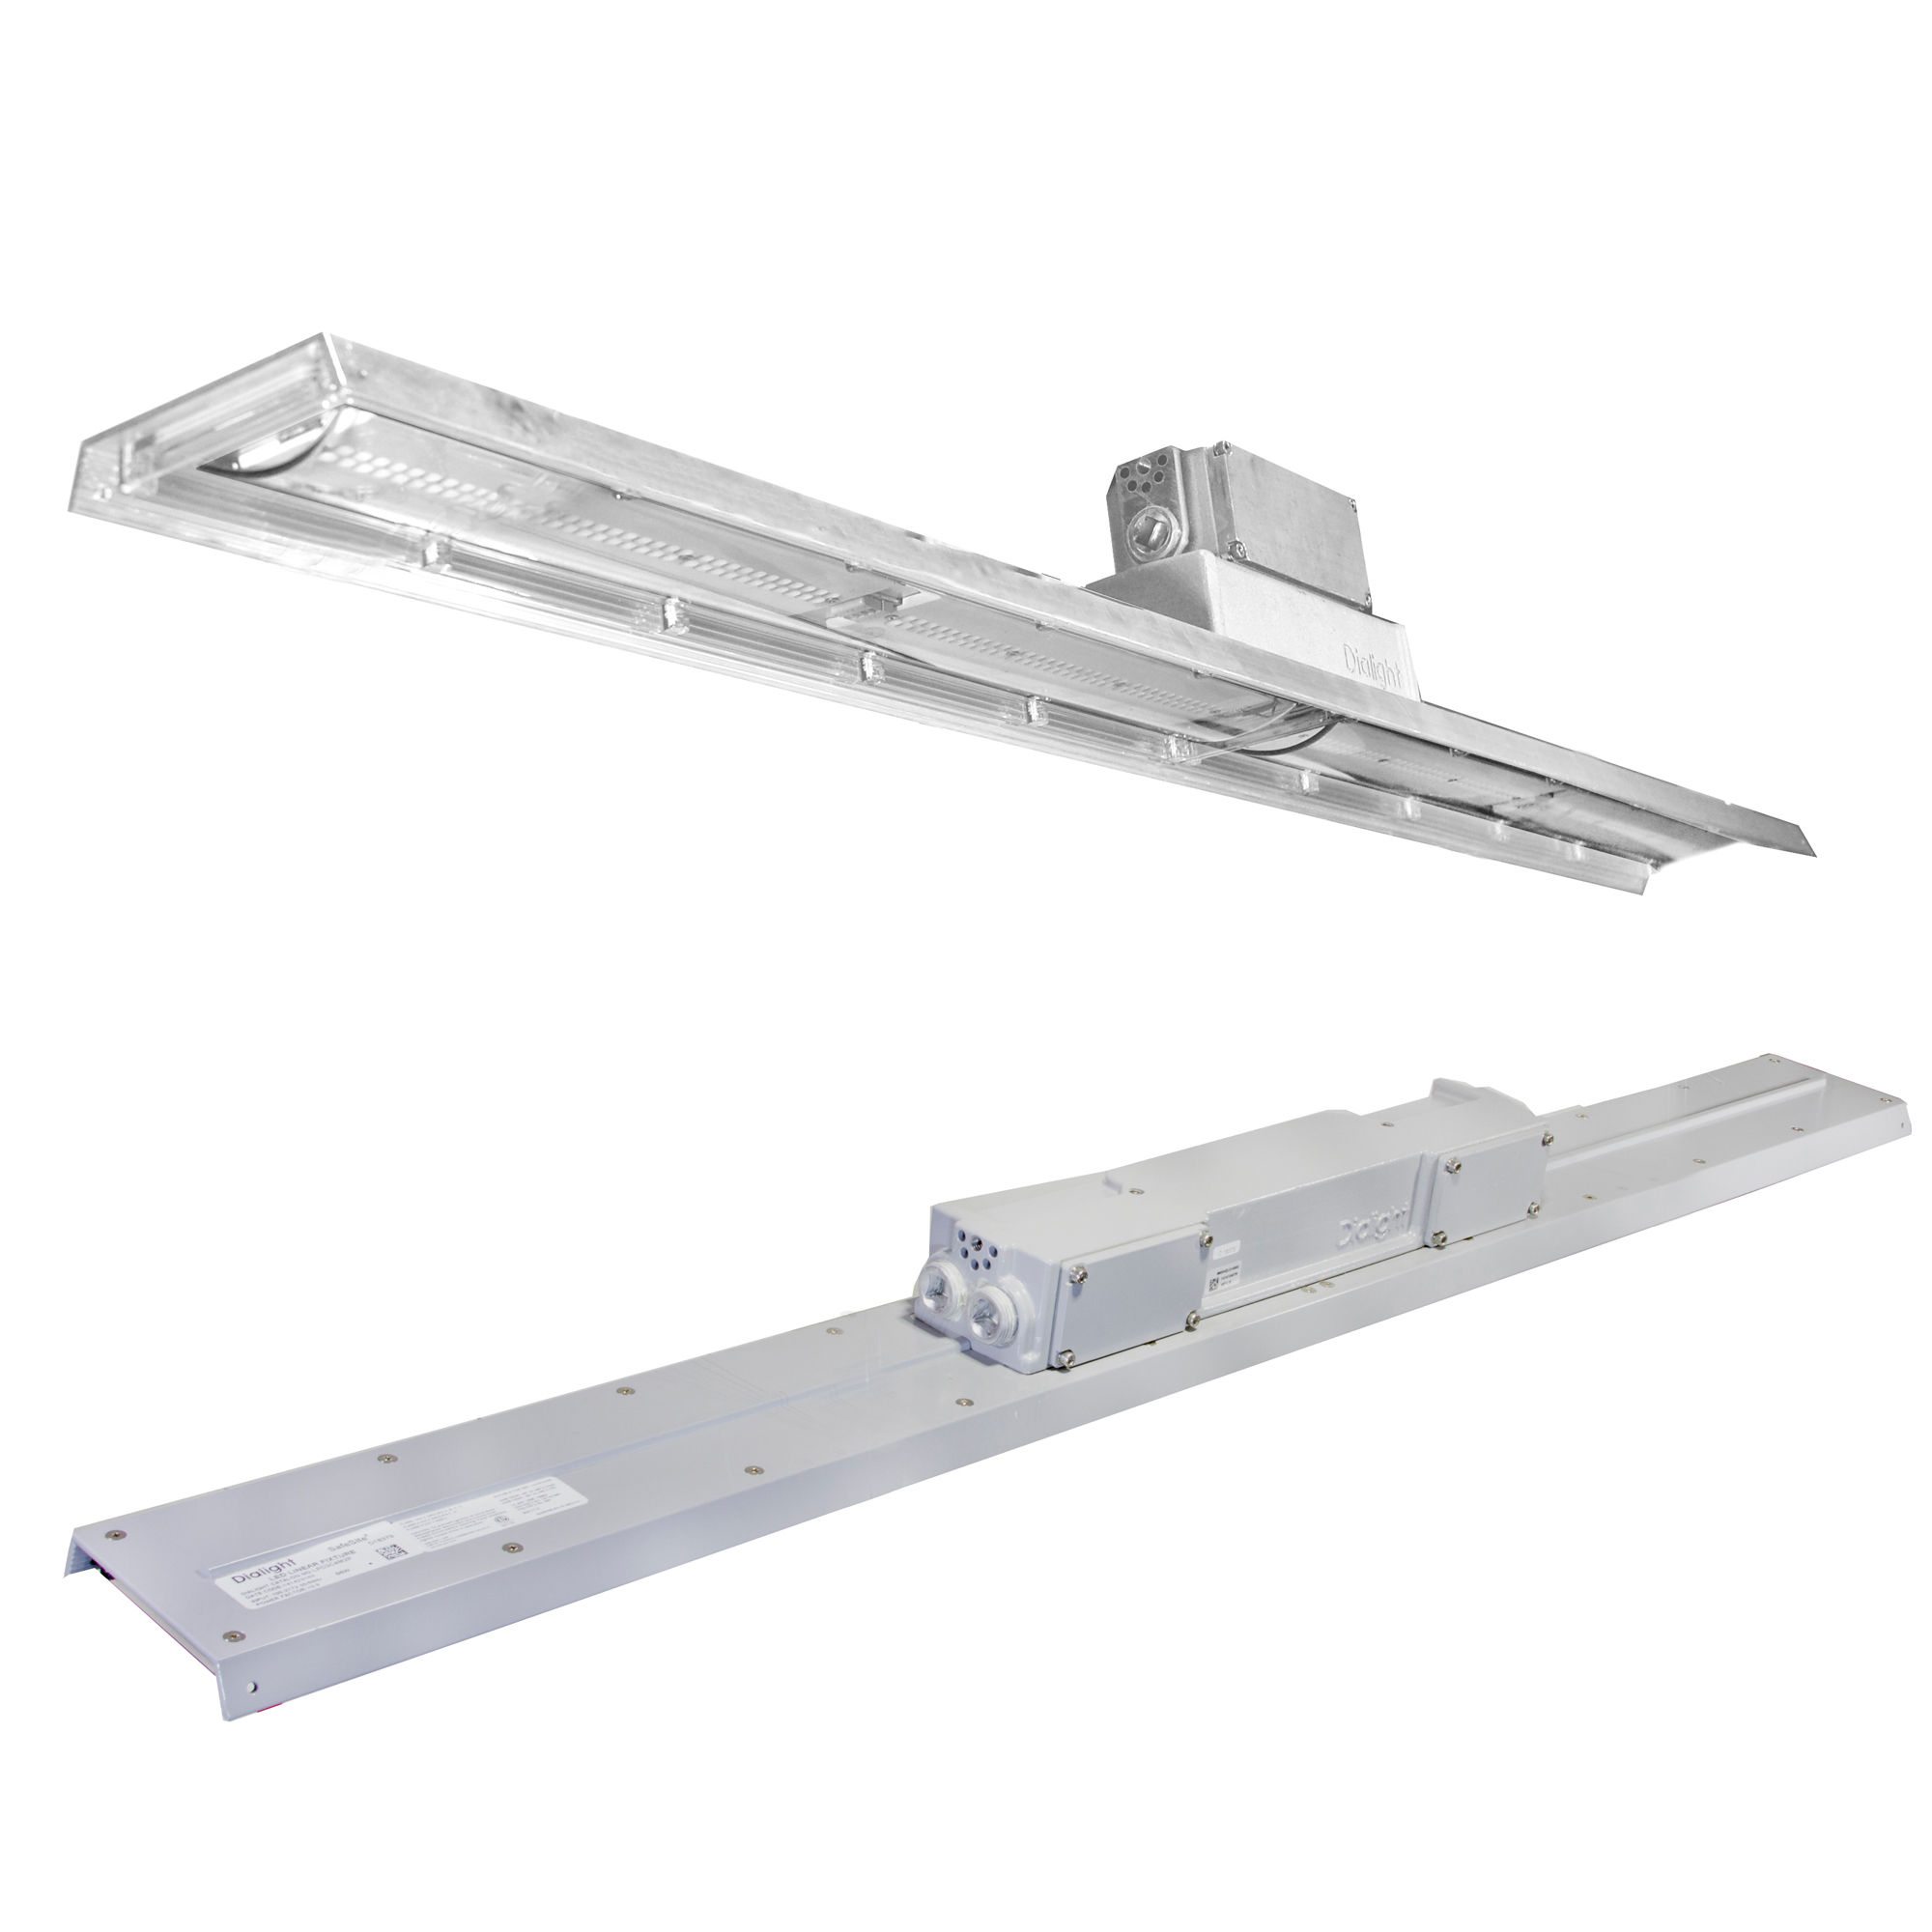 Dialight linear light fixtures on white background.